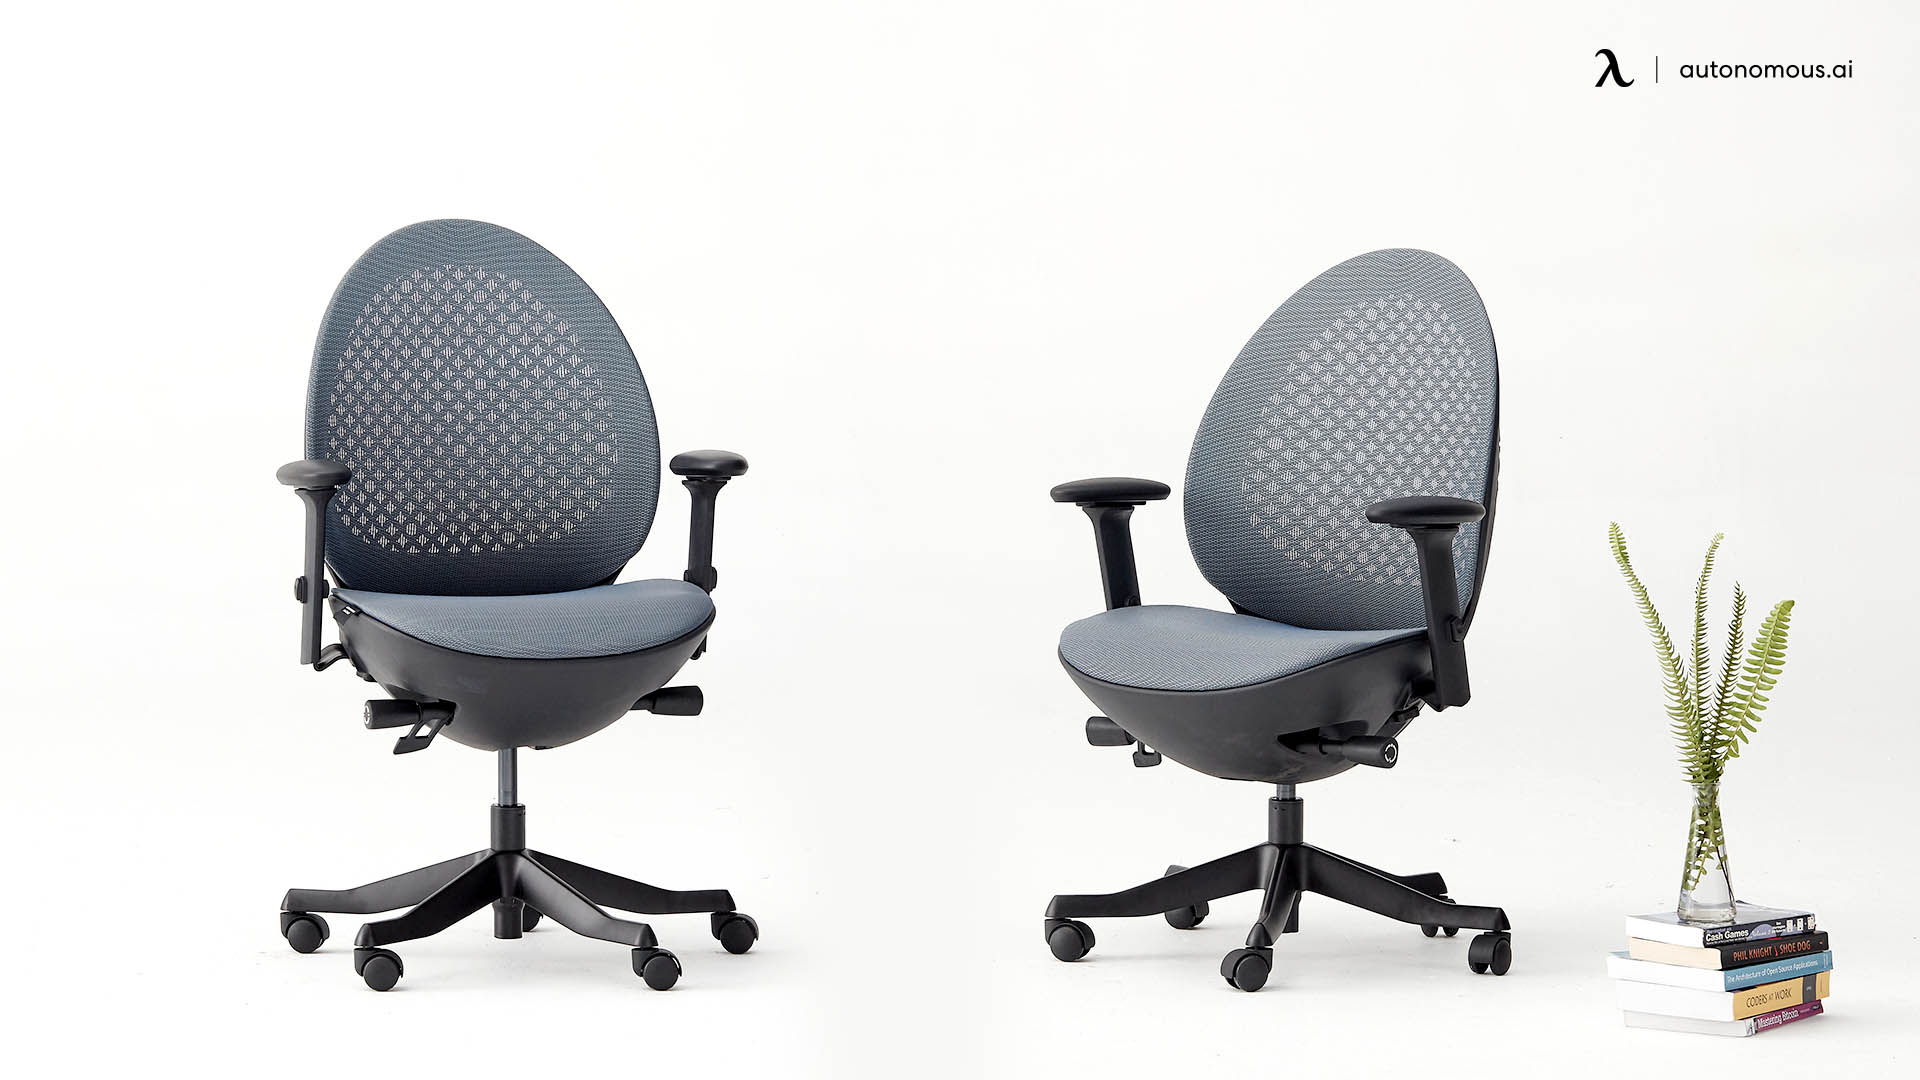 Buyers Guide For An Ergonomic Chair For Office Usage.